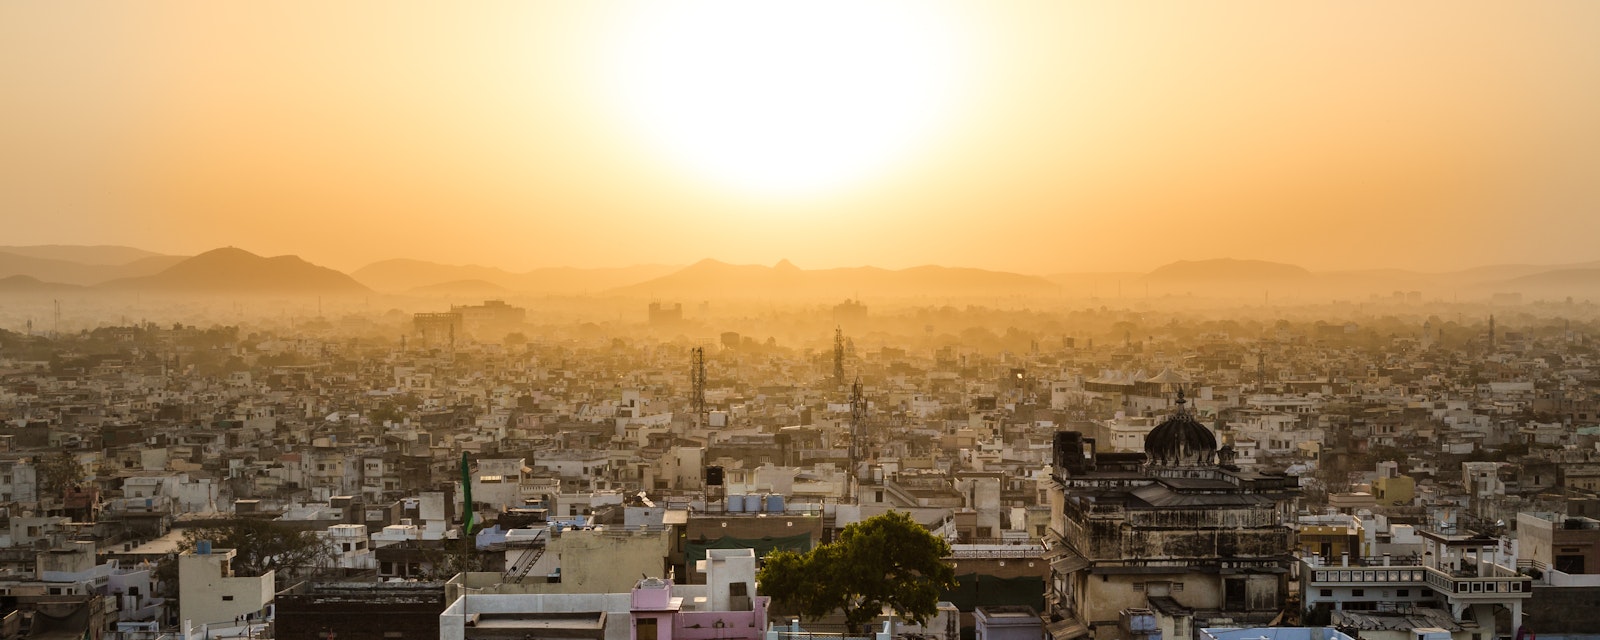 High view showing part of the Udaipur skyline at sunrise